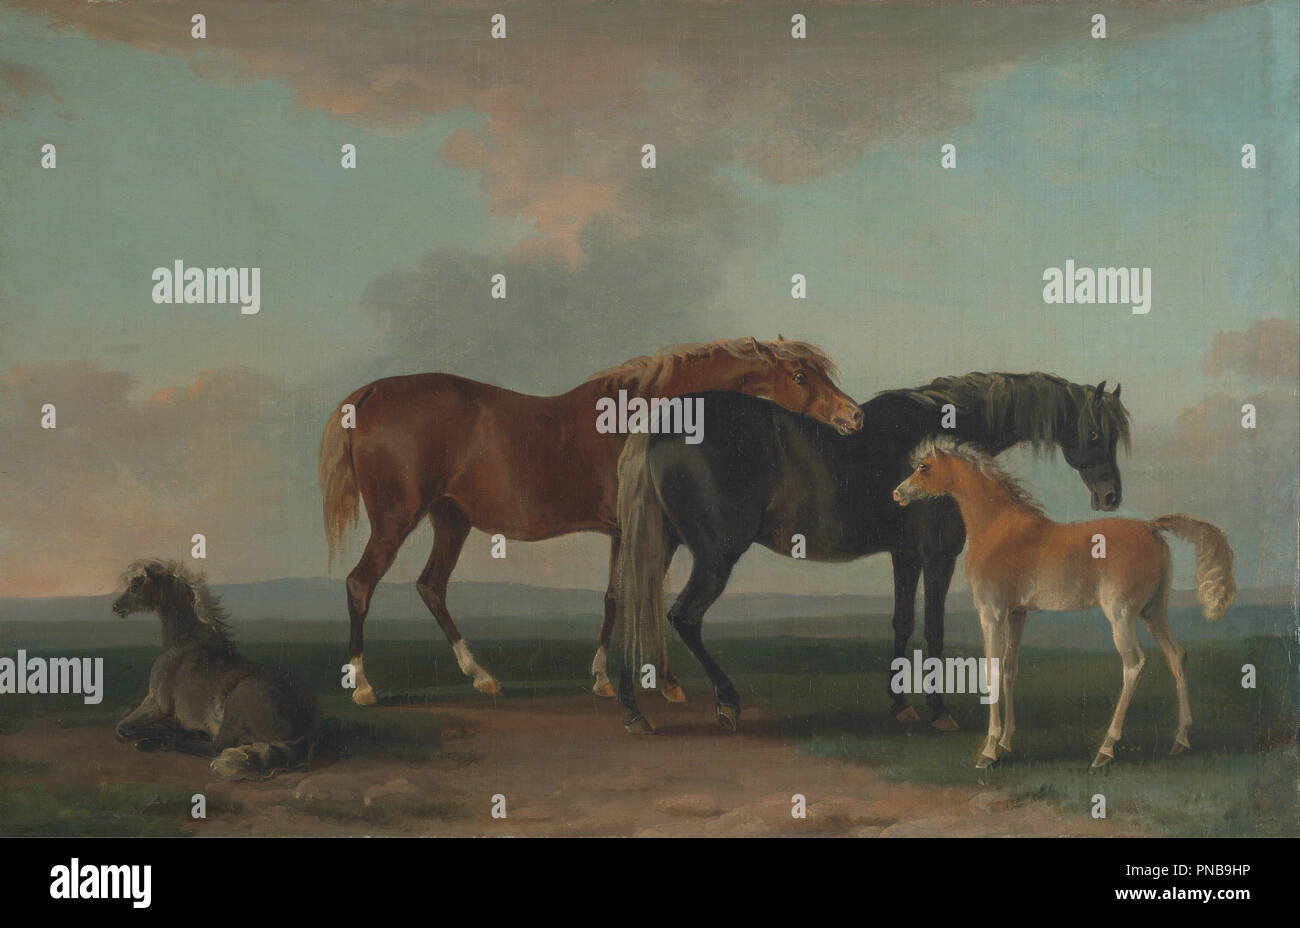 Mares and Foals, facing right. Date/Period: Between 1790 and 1800. Painting. Oil on canvas. Height: 432 mm (17 in); Width: 699 mm (27.51 in). Author: Sawrey Gilpin. Stock Photo